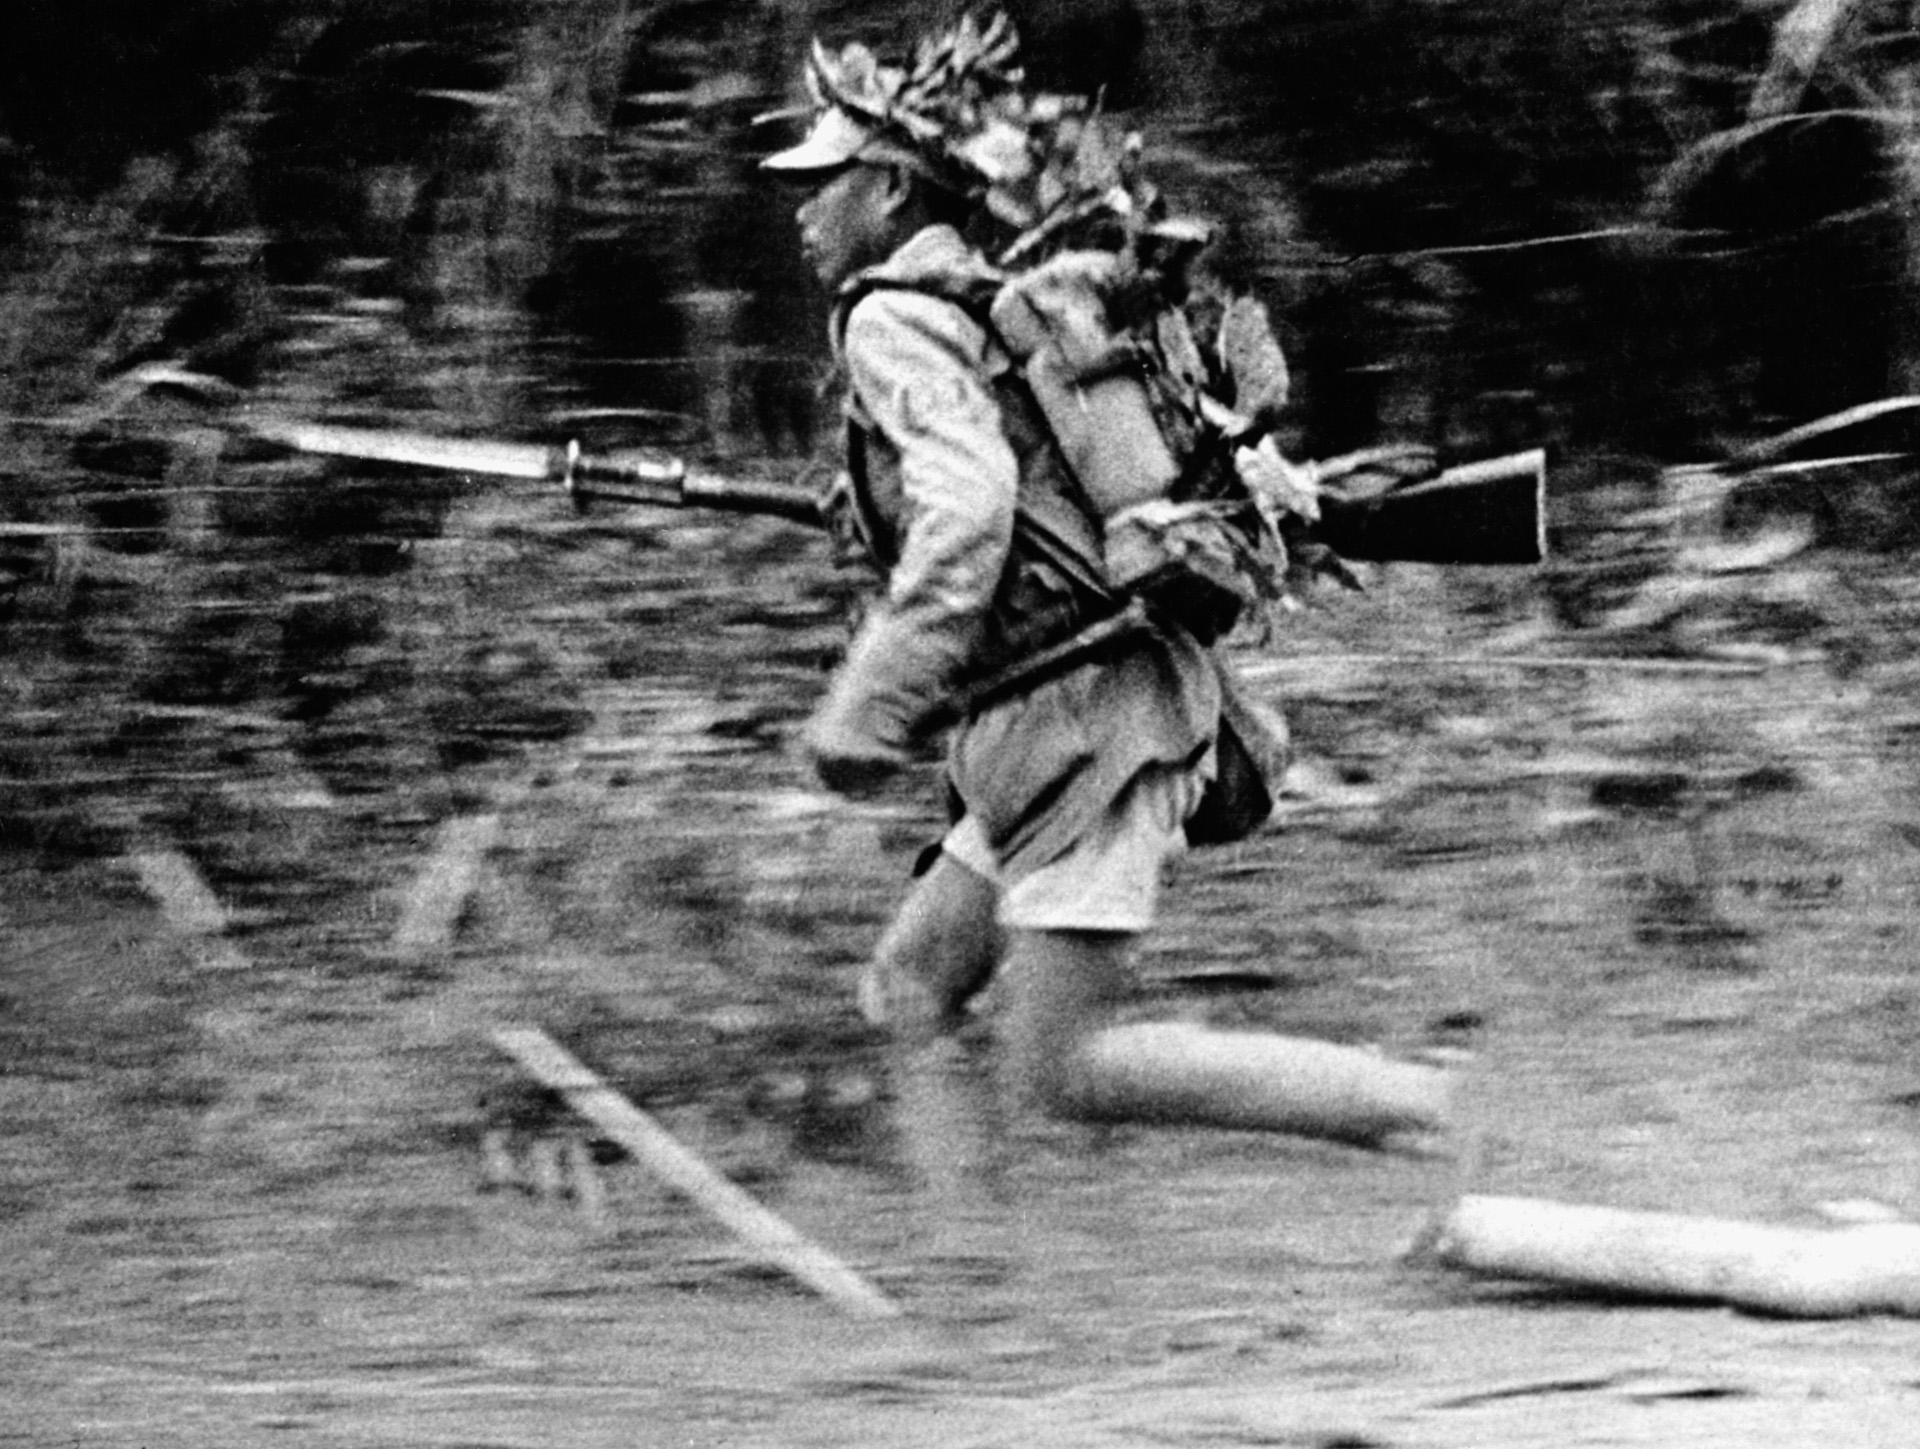 Hearing the sound of gunfire, a Japanese soldier moves swiftly through a section of jungle during an engagement in Burma,1944.